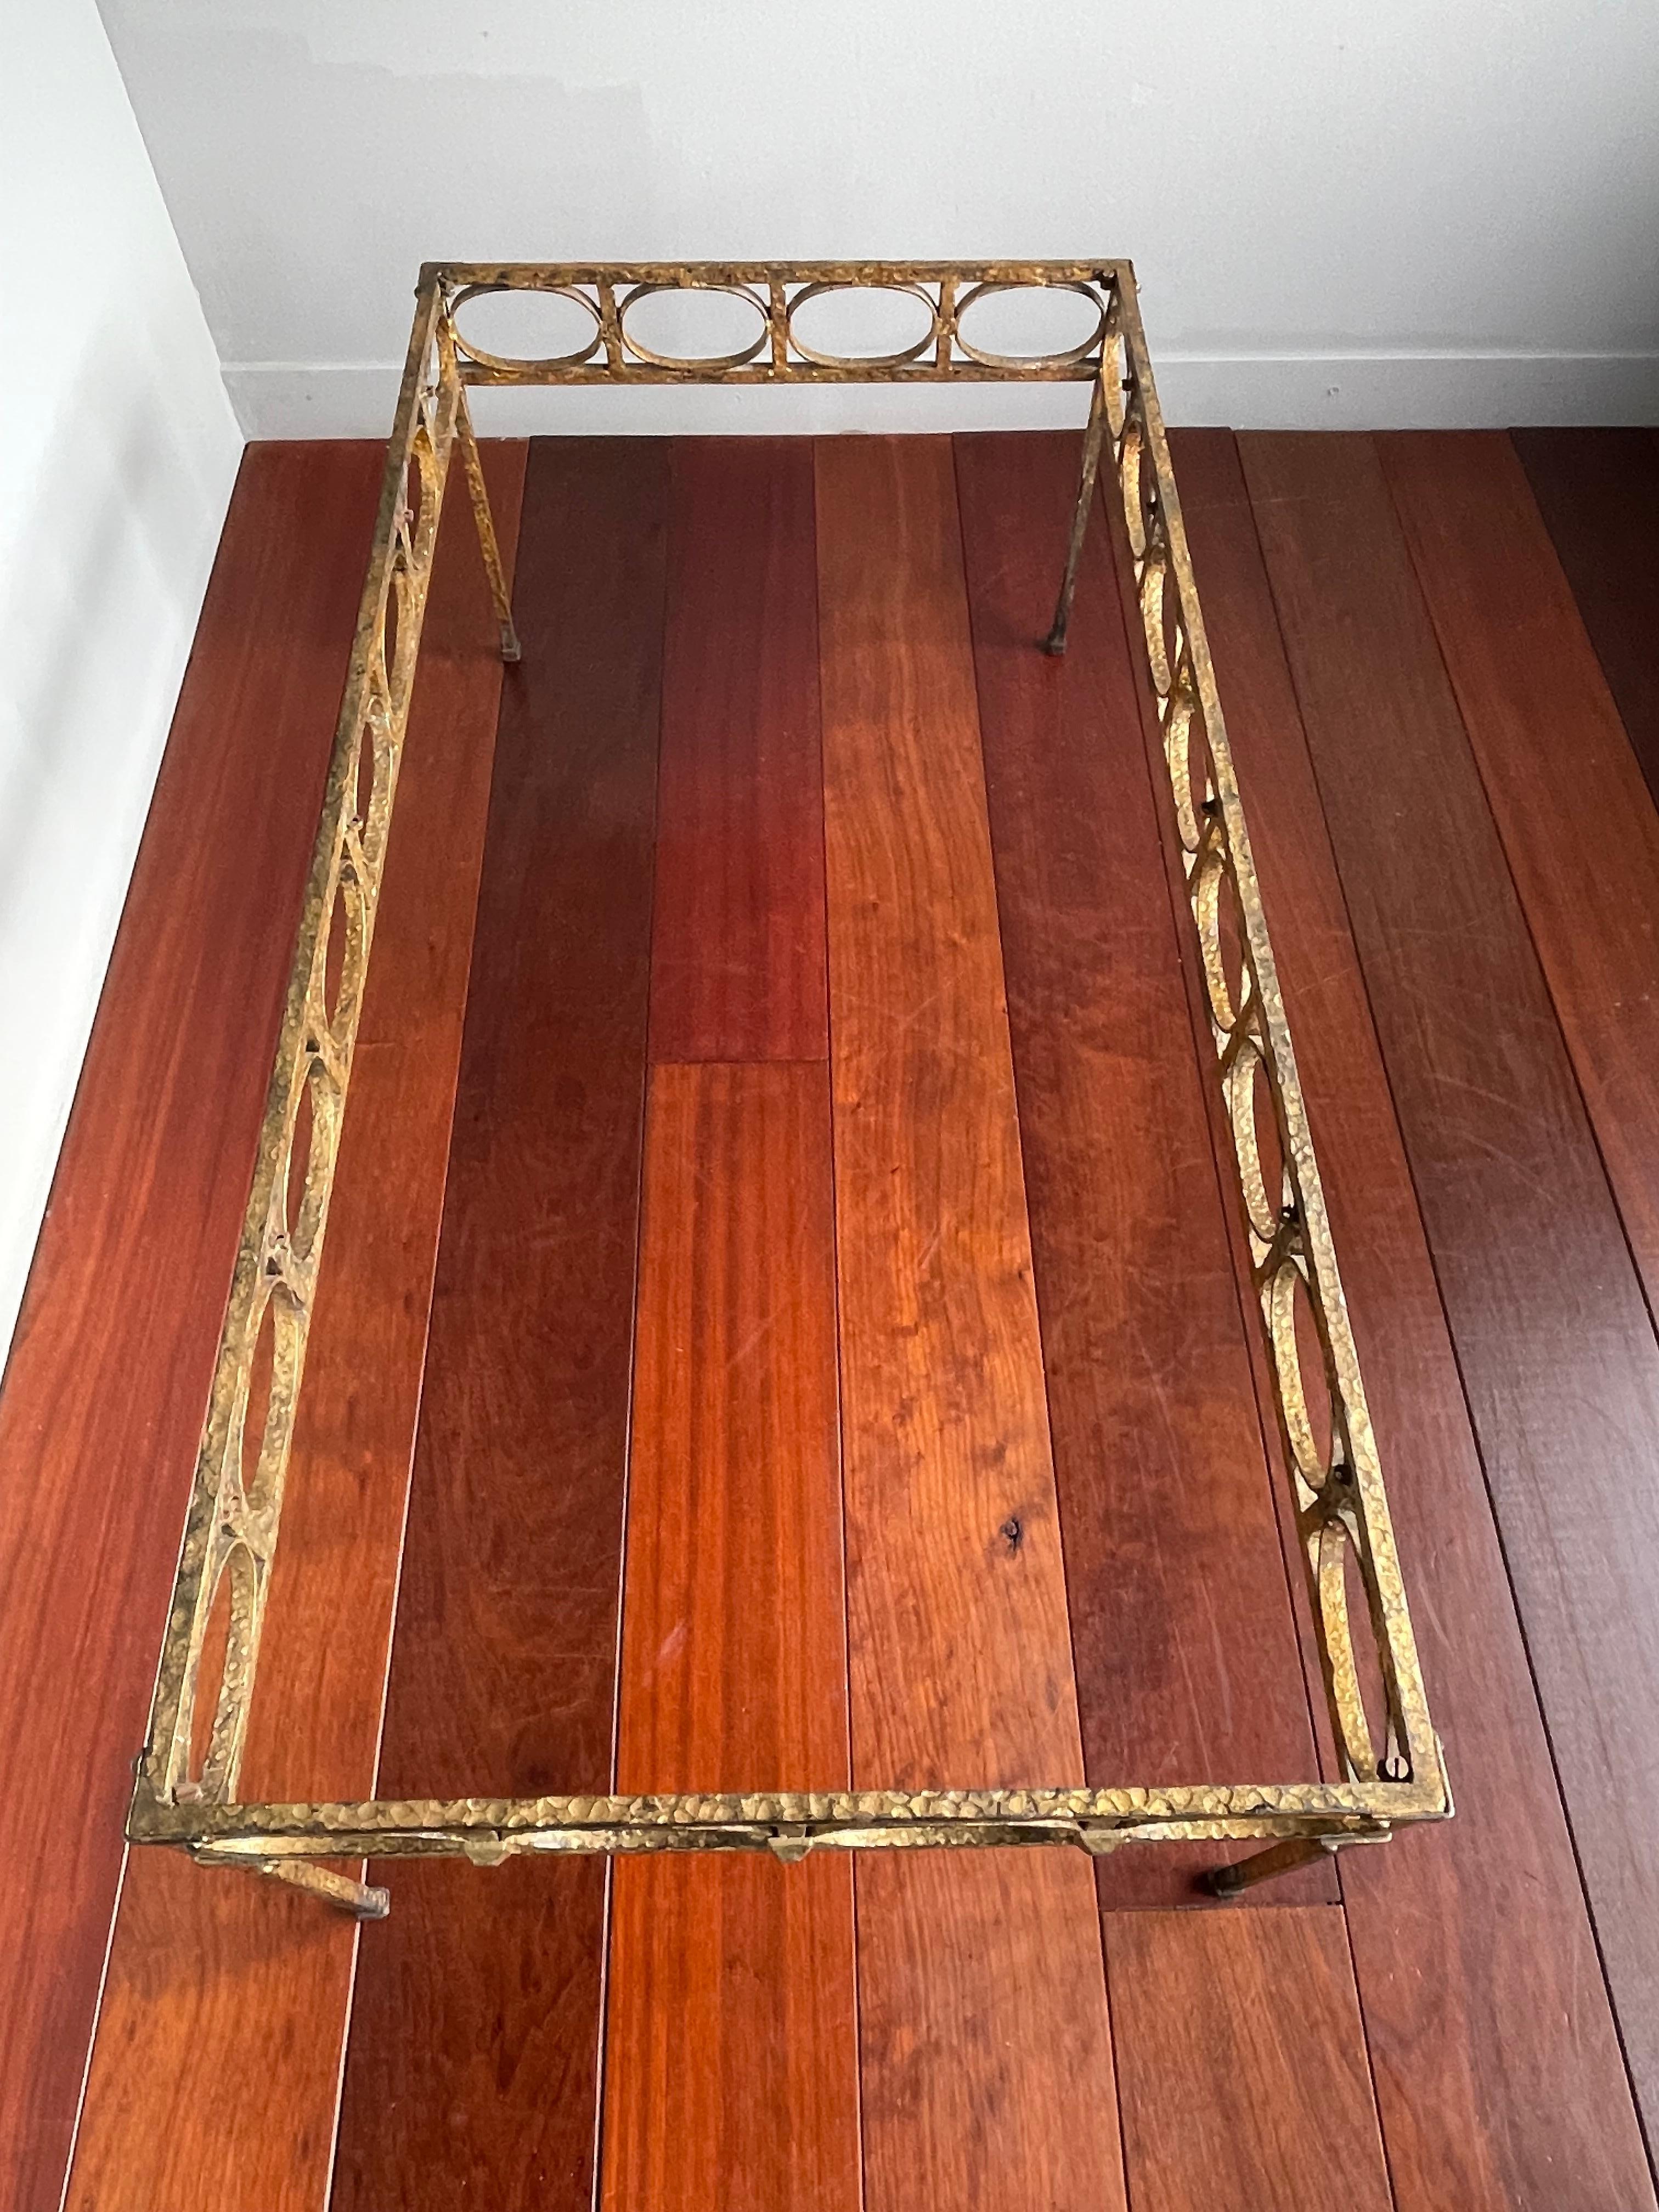 Stunning Midcentury Modern Gilt Wrought Iron Coffee Table Base by Ferro Art 1950 For Sale 3